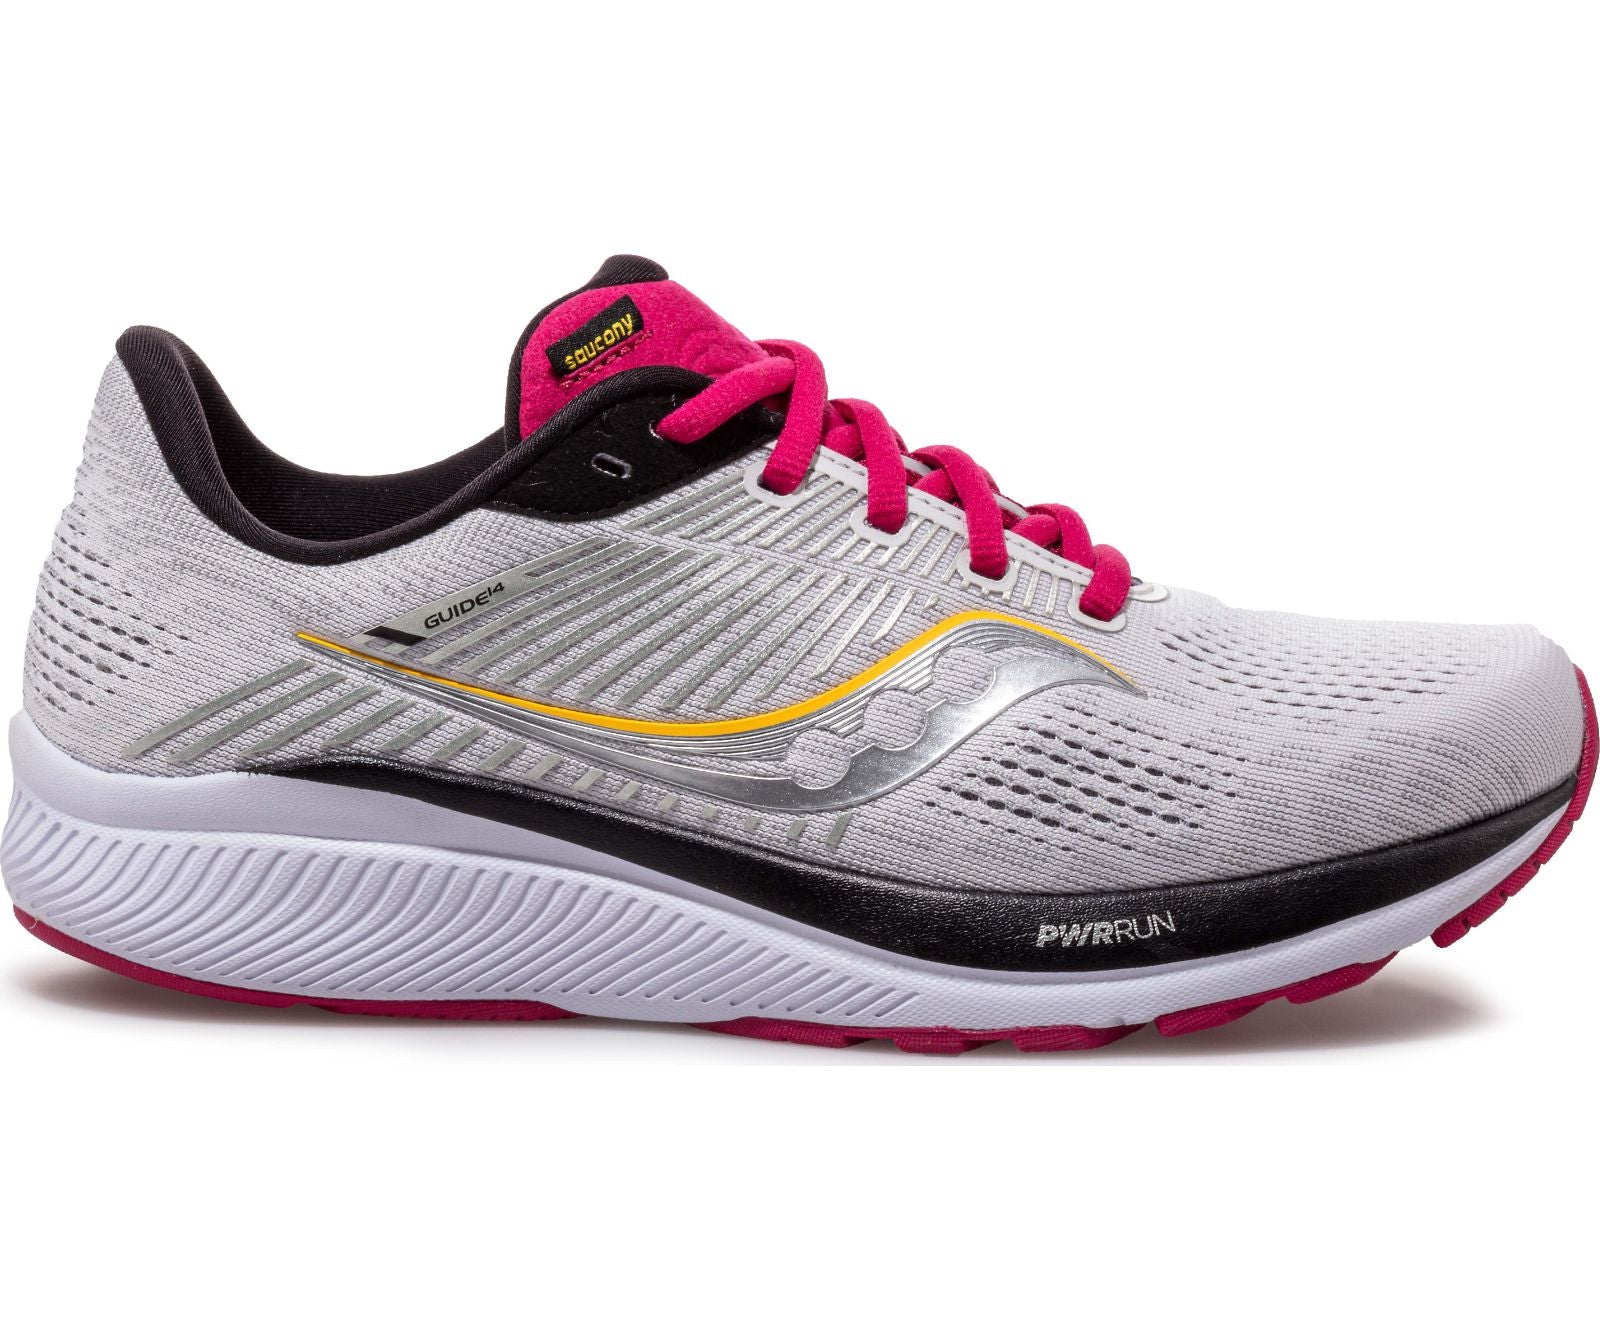 Saucony Women's Guide 14 Wide Stability Road Running Shoe